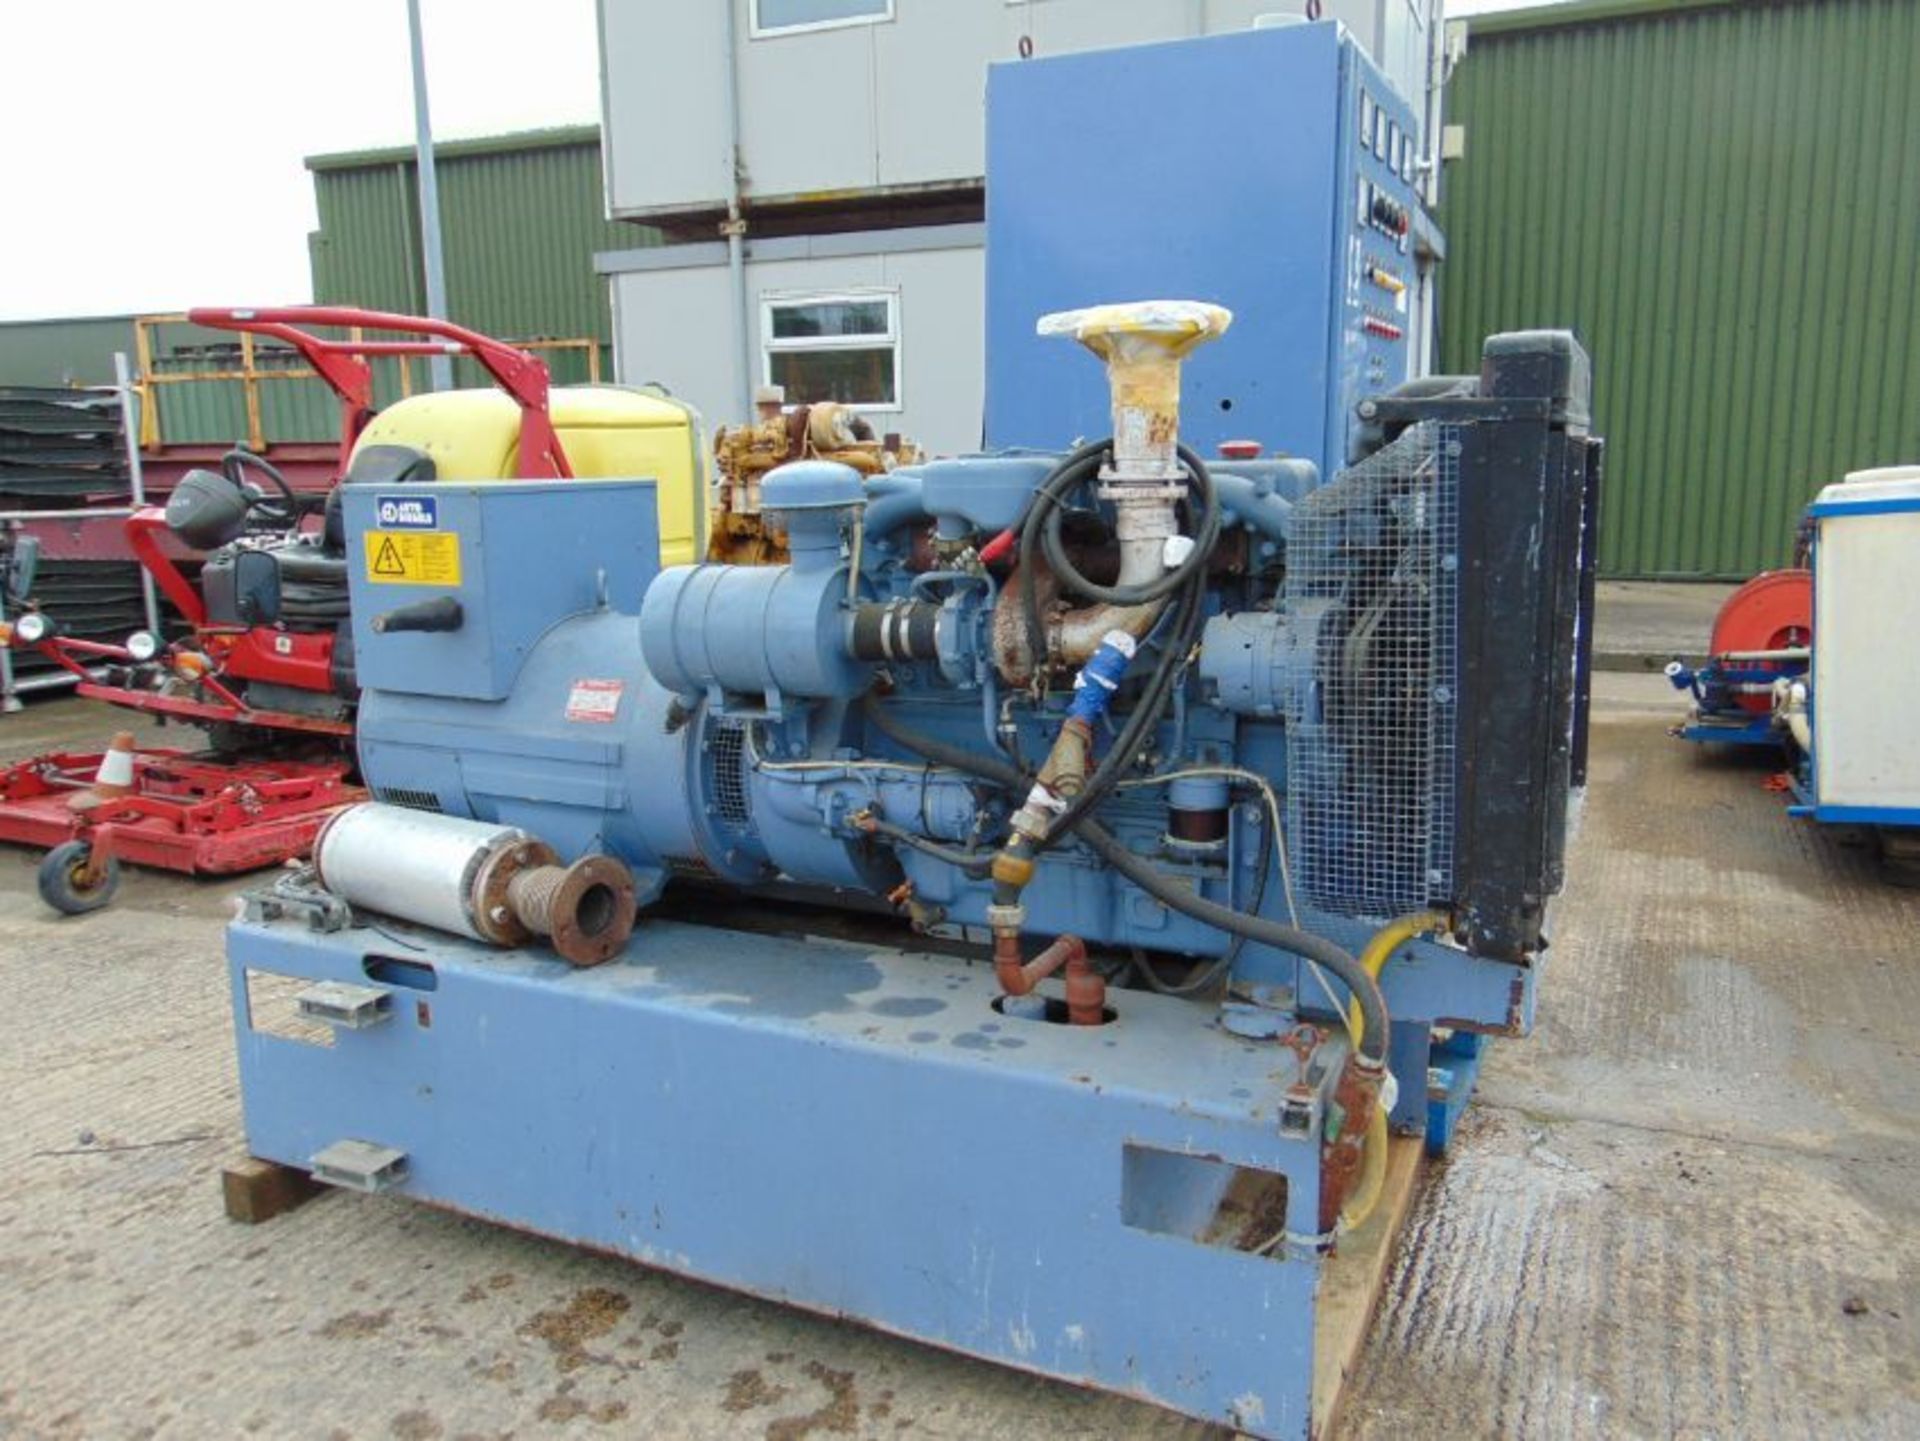 Auto Diesel 85 KVA 68 Kw 3 Phase 415/240V Standby Automatic Mains Faliure Generator ONLY 807 HOURS! - Image 2 of 20